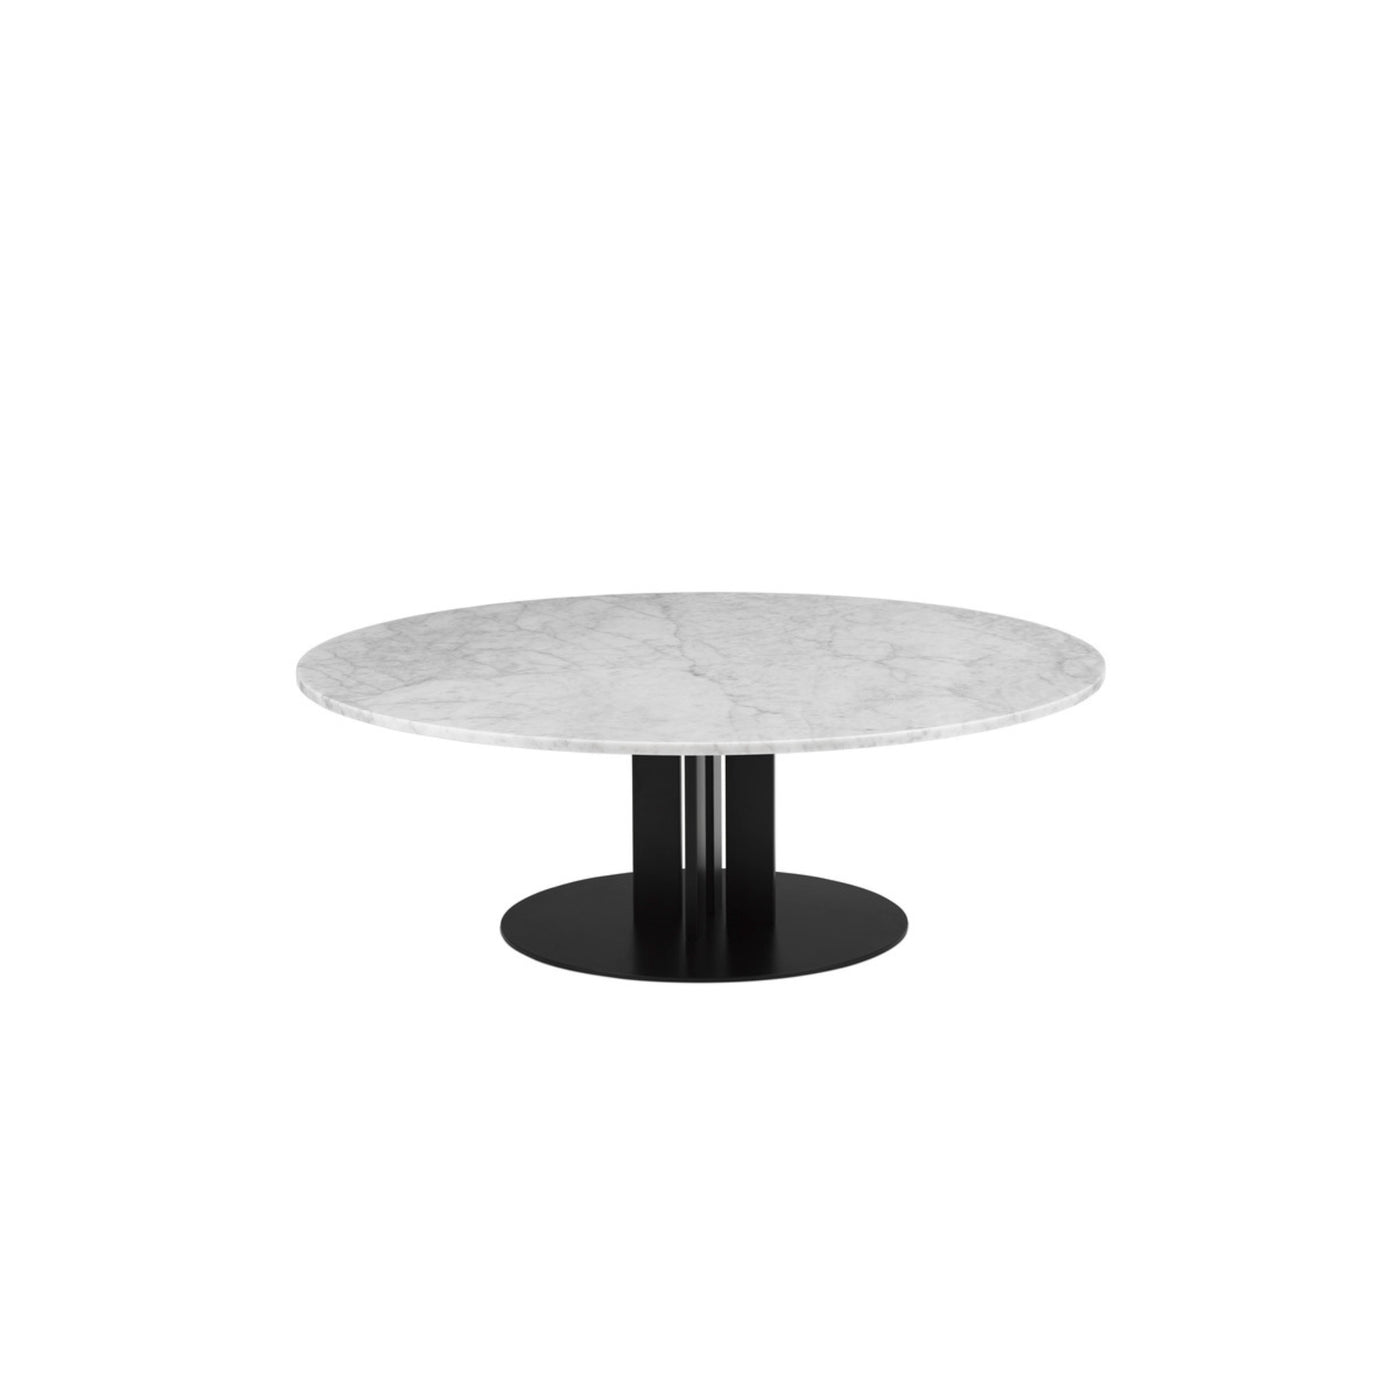 Normann Copenhagen Scala Coffee Table at someday designs. #colour_white-marble